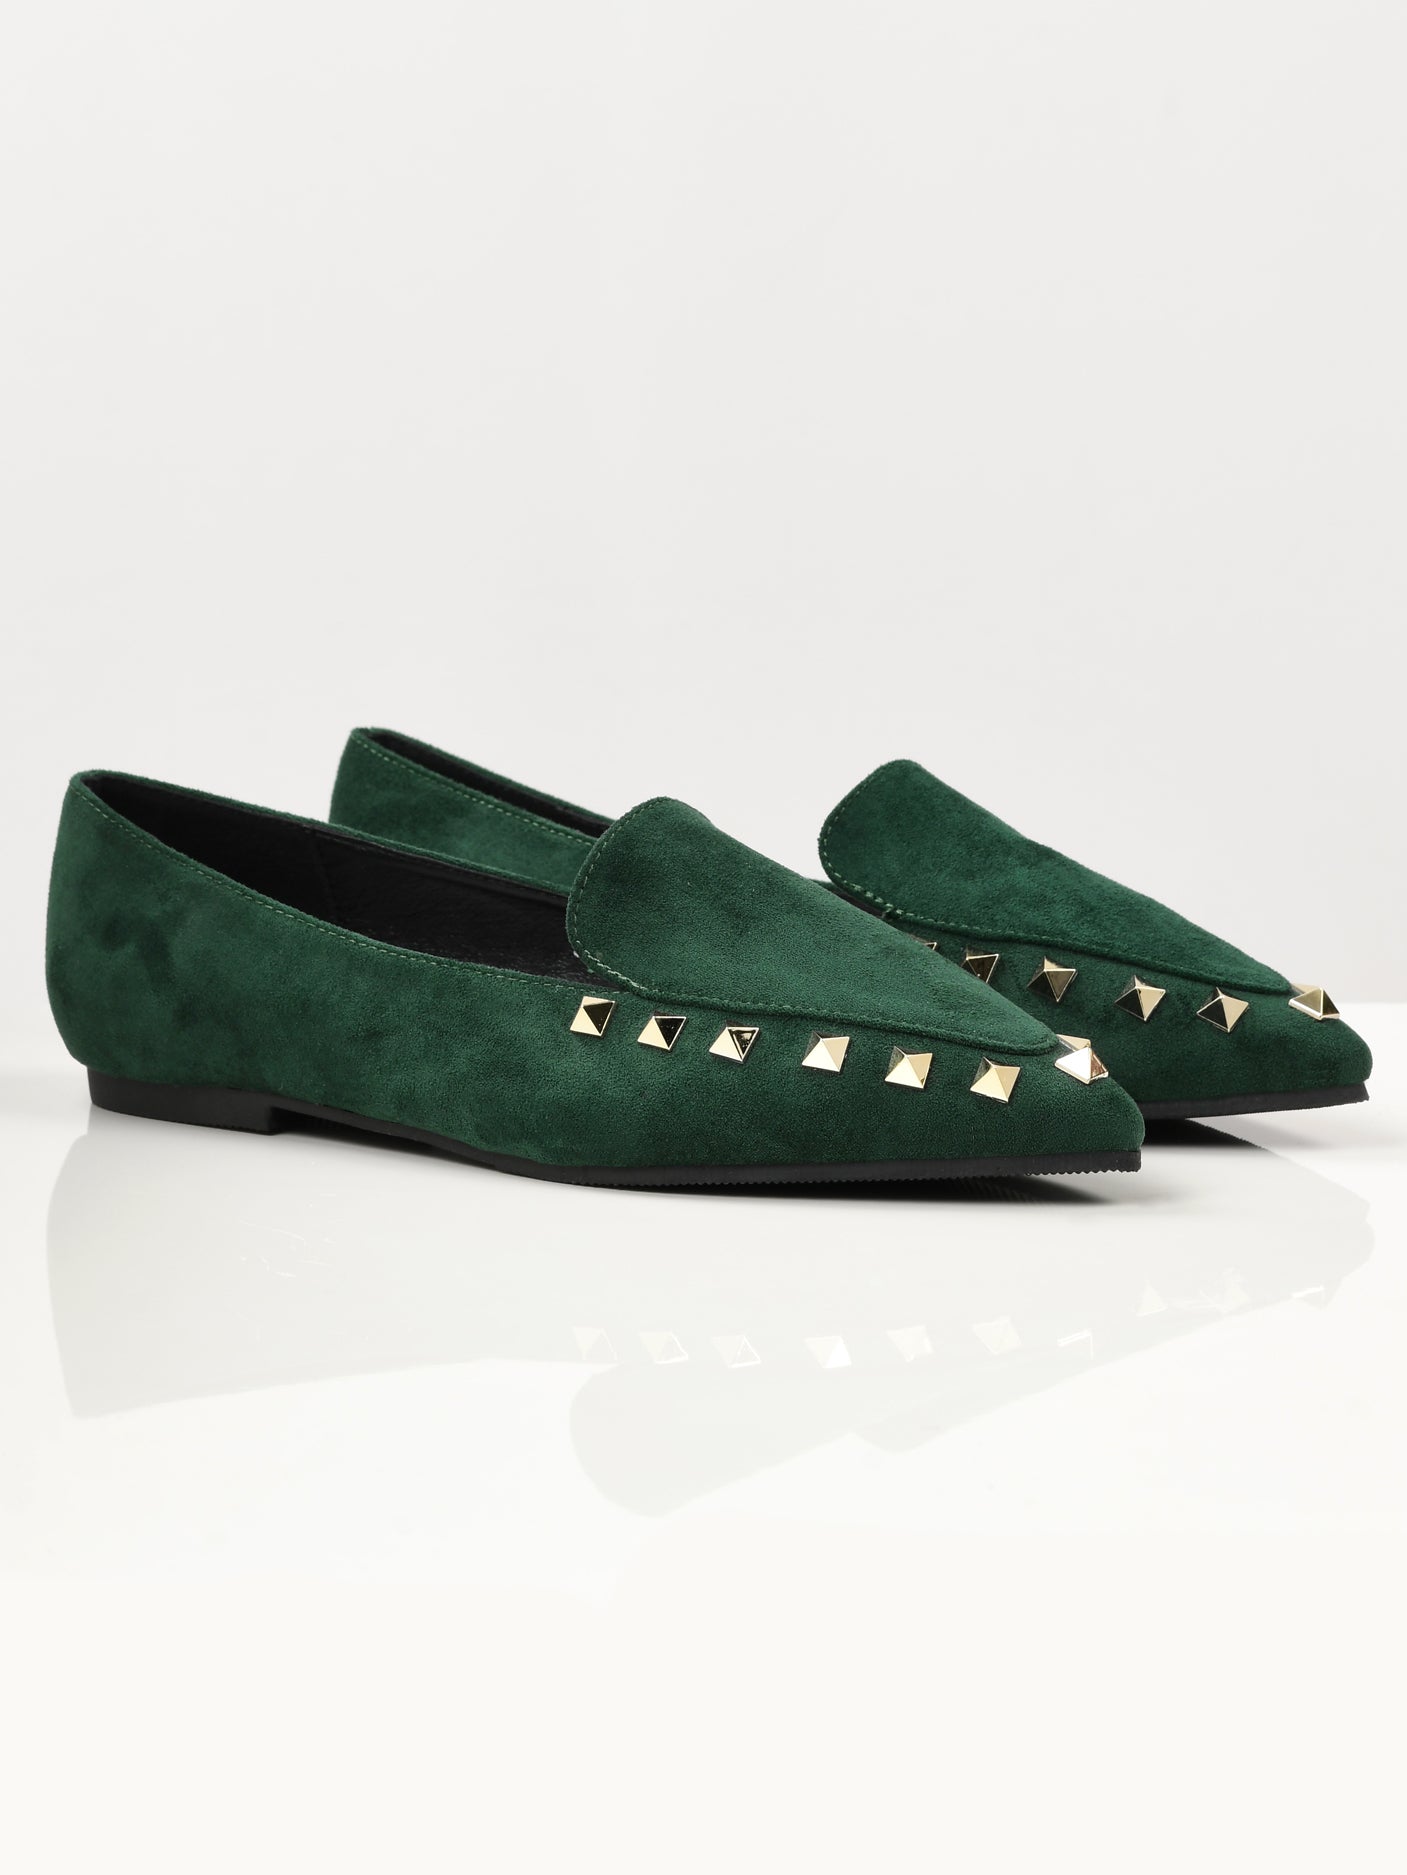 Studded Suede Shoes - Green